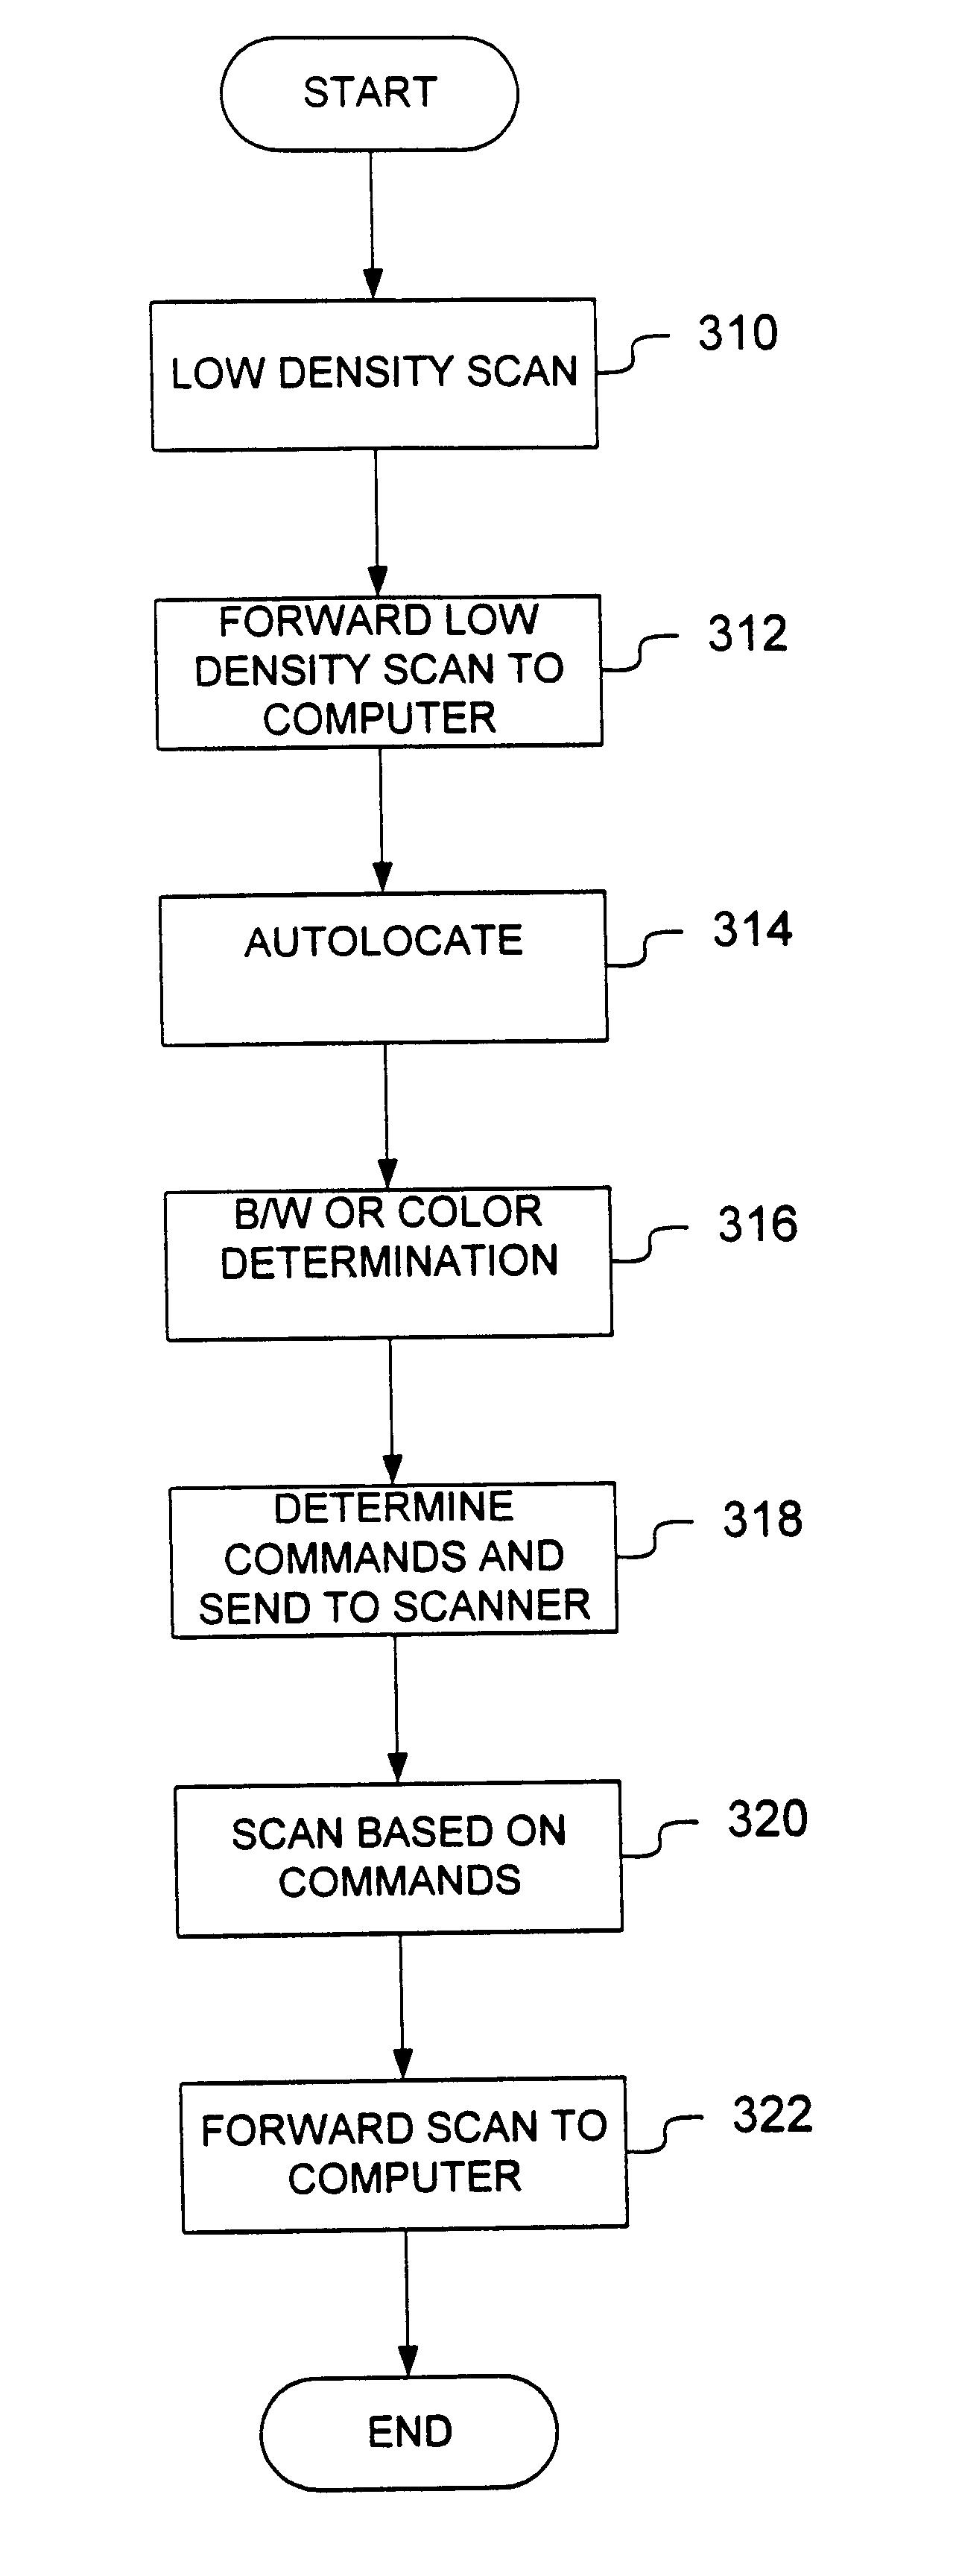 Apparatus and method for determining an area encompassing an image for scanning the image